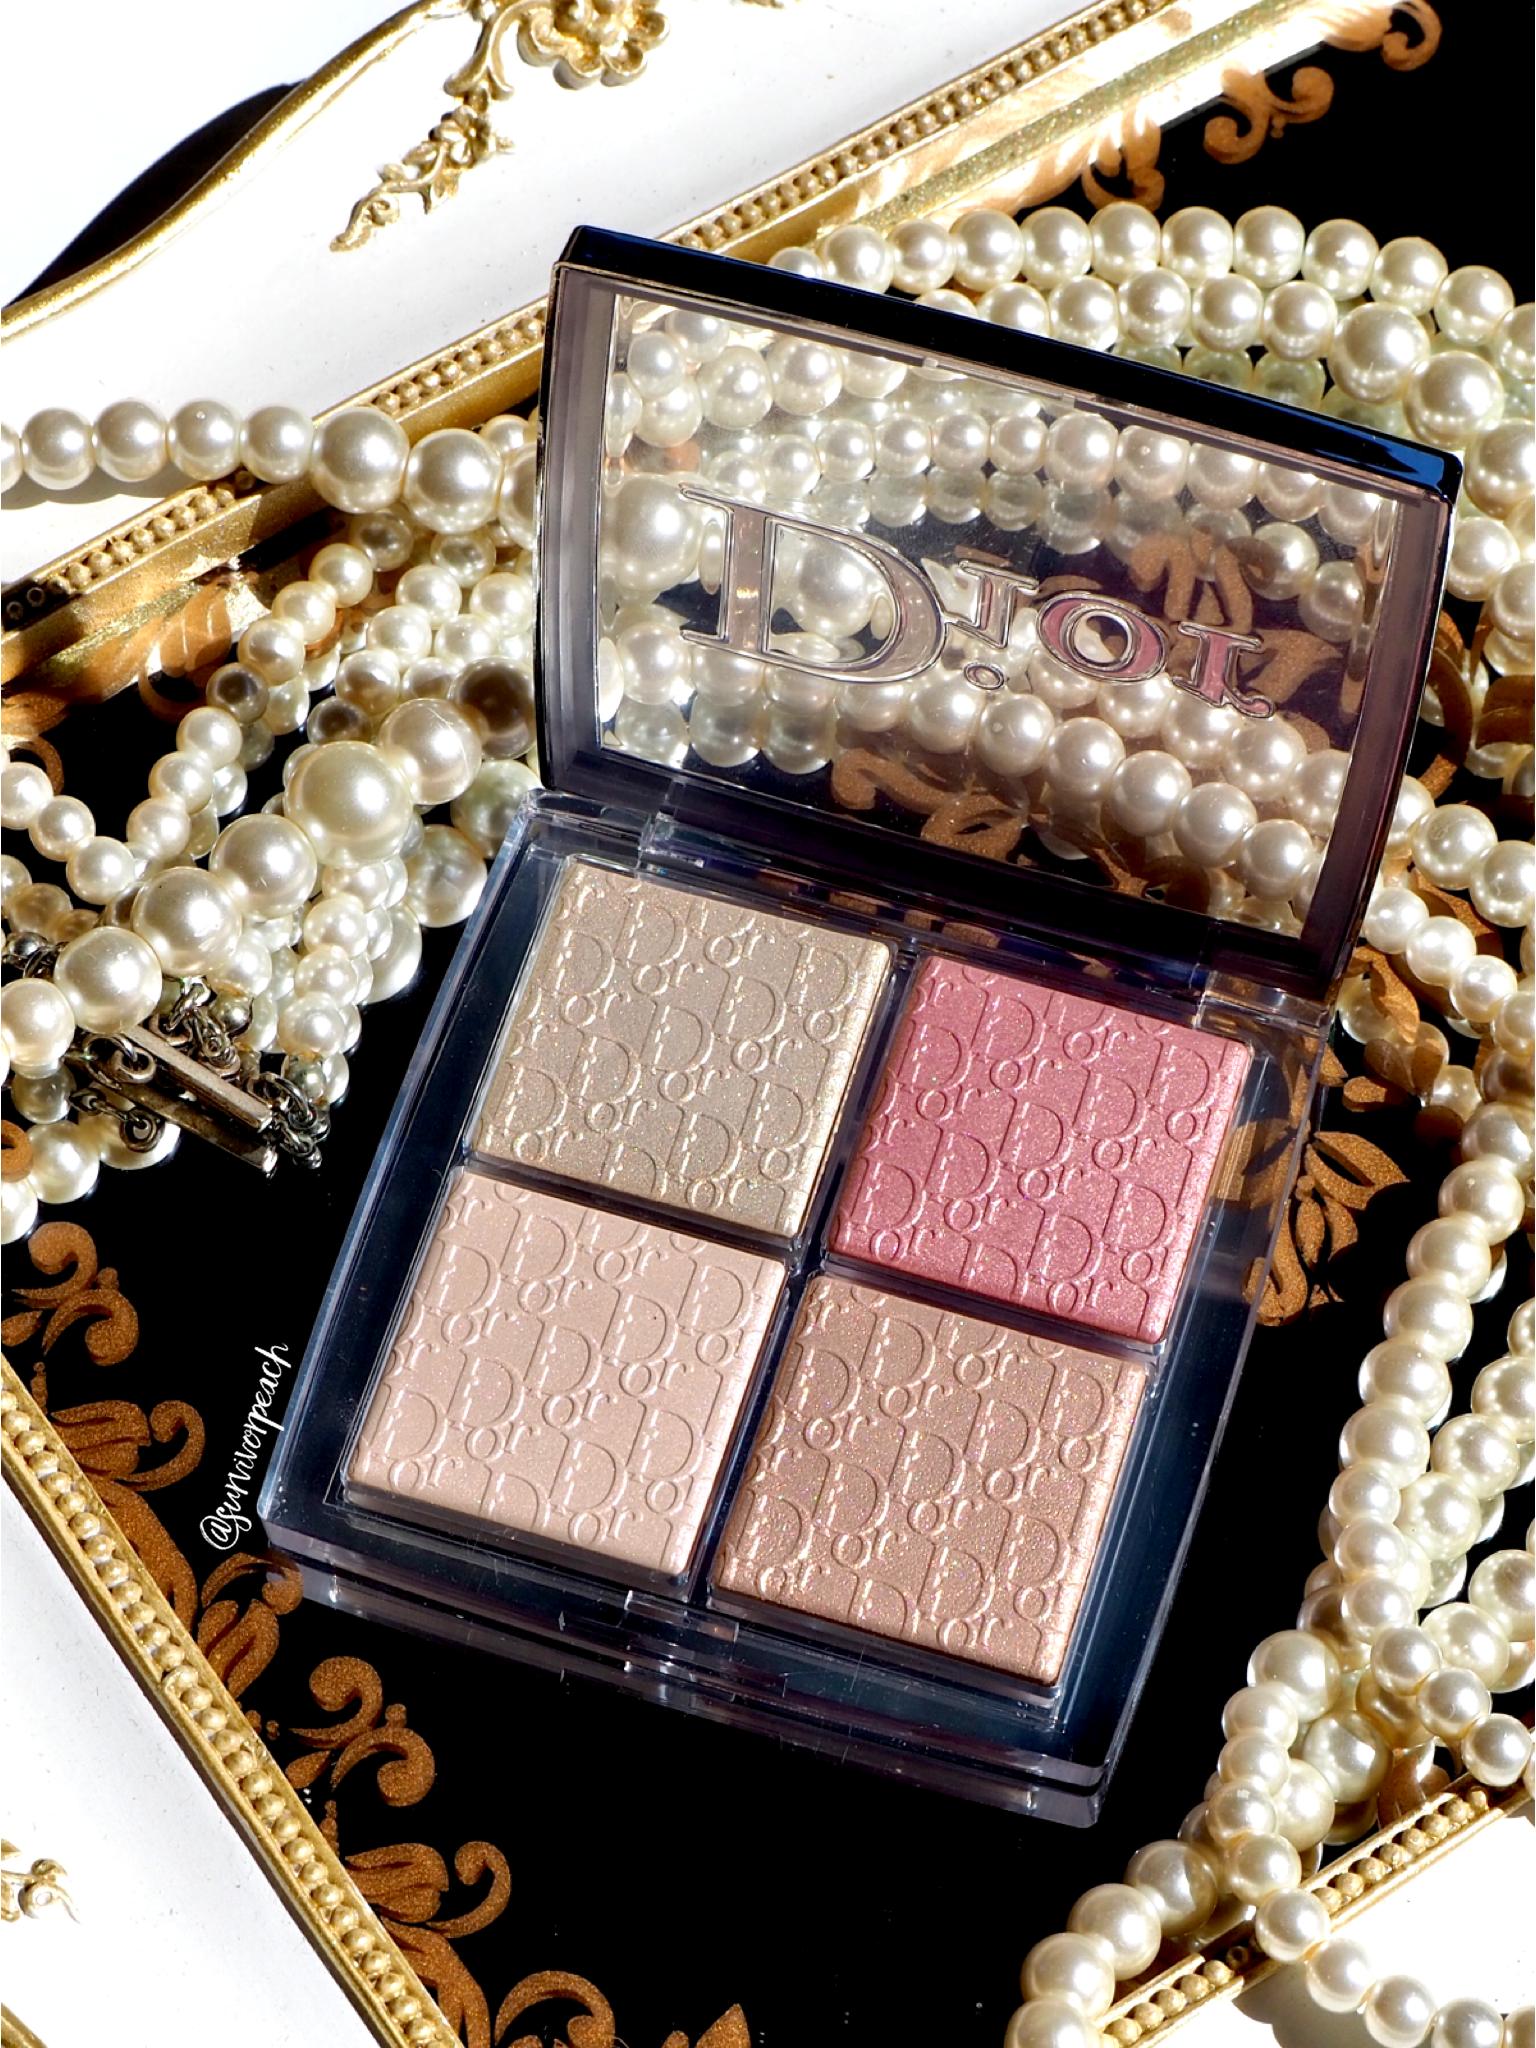 Dior Backstage Glow Face Palette Swatches: Rose Gold, Pure Gold, Copper — Survivorpeach